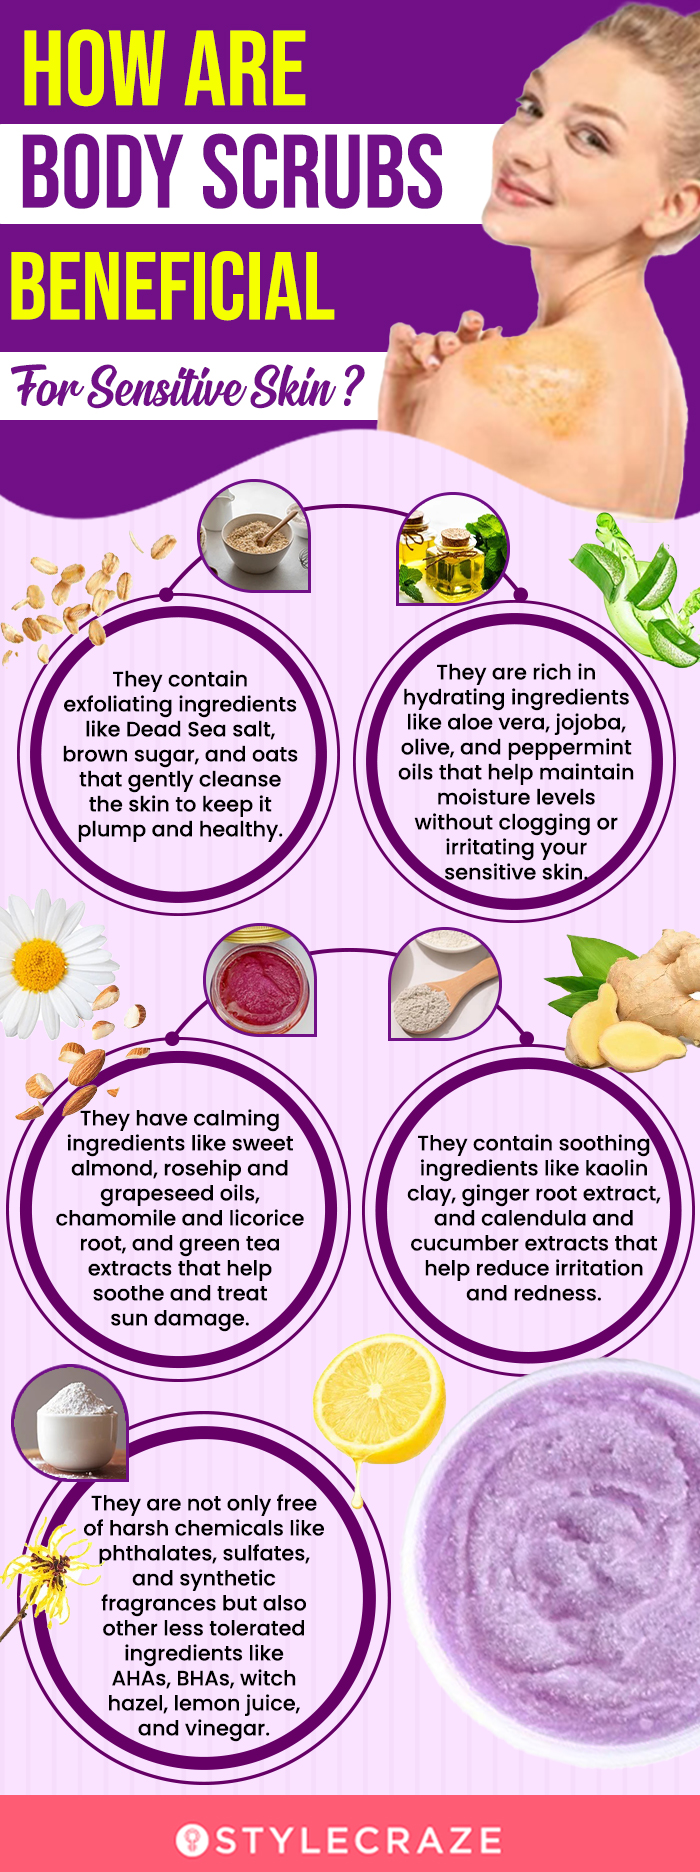 How Are Body Scrubs Beneficial For Sensitive Skin? (infographic)